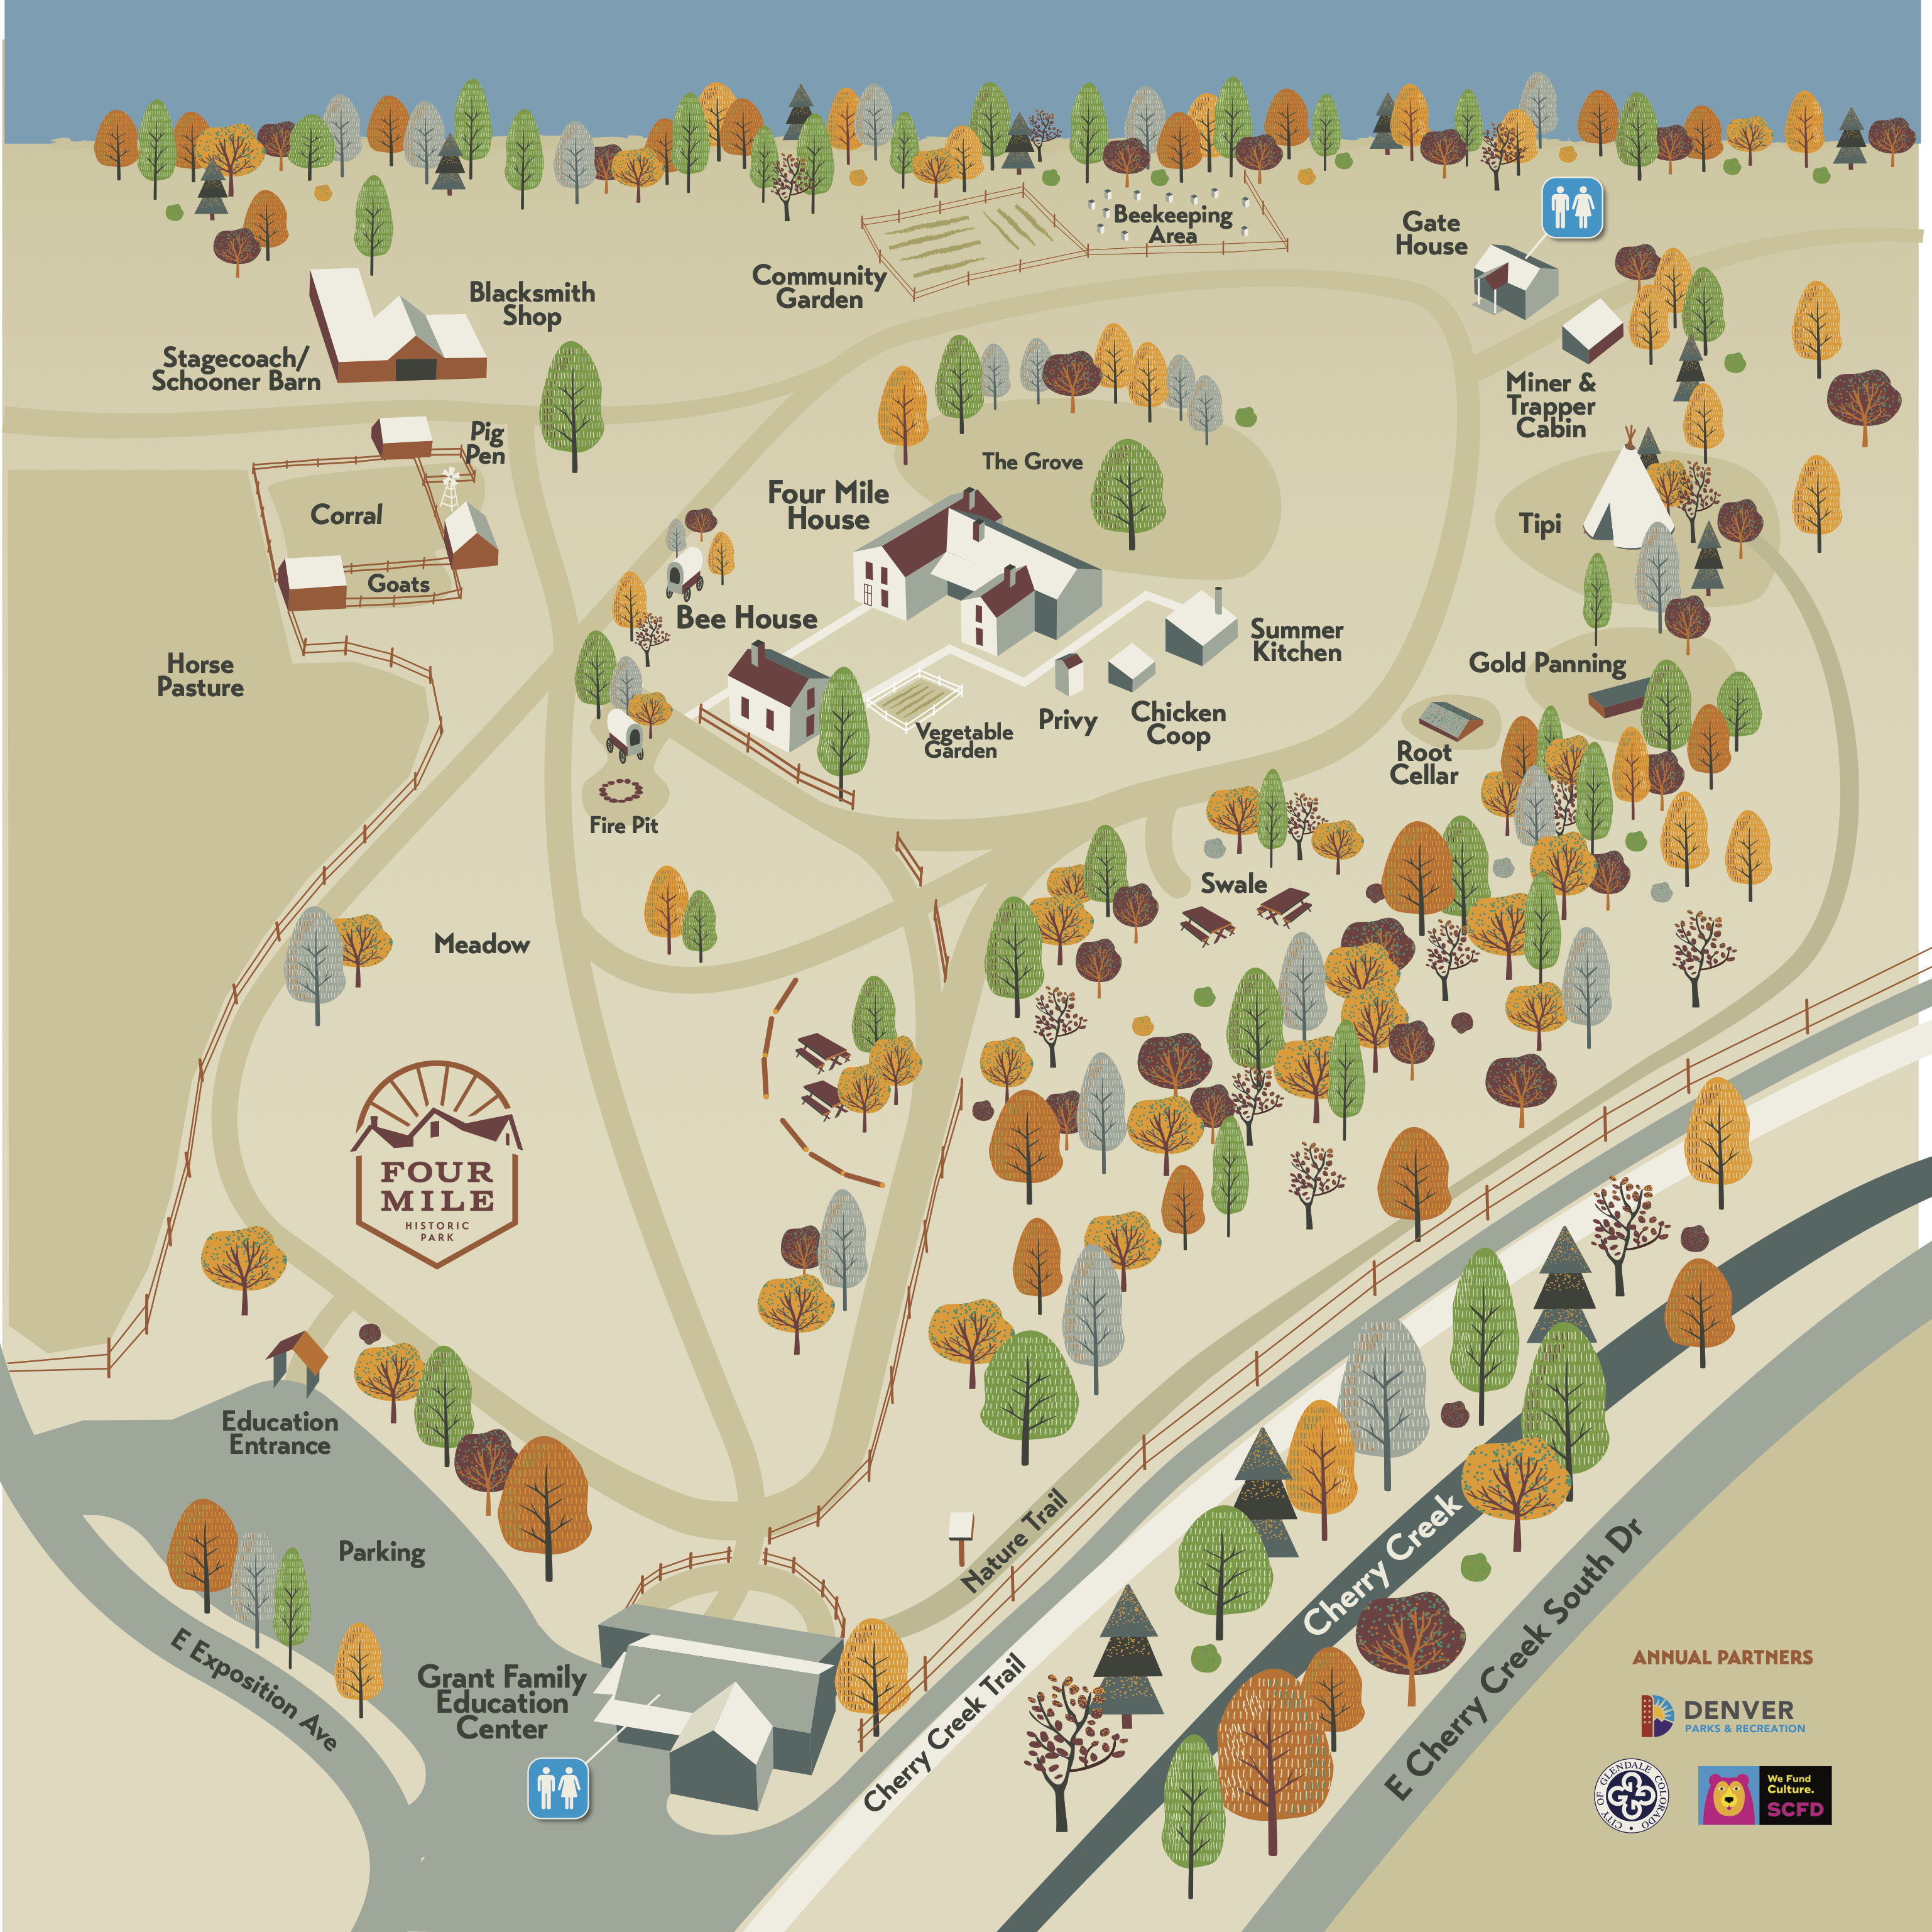 Drawn map of Four Mile Historic Park's trails and buildings